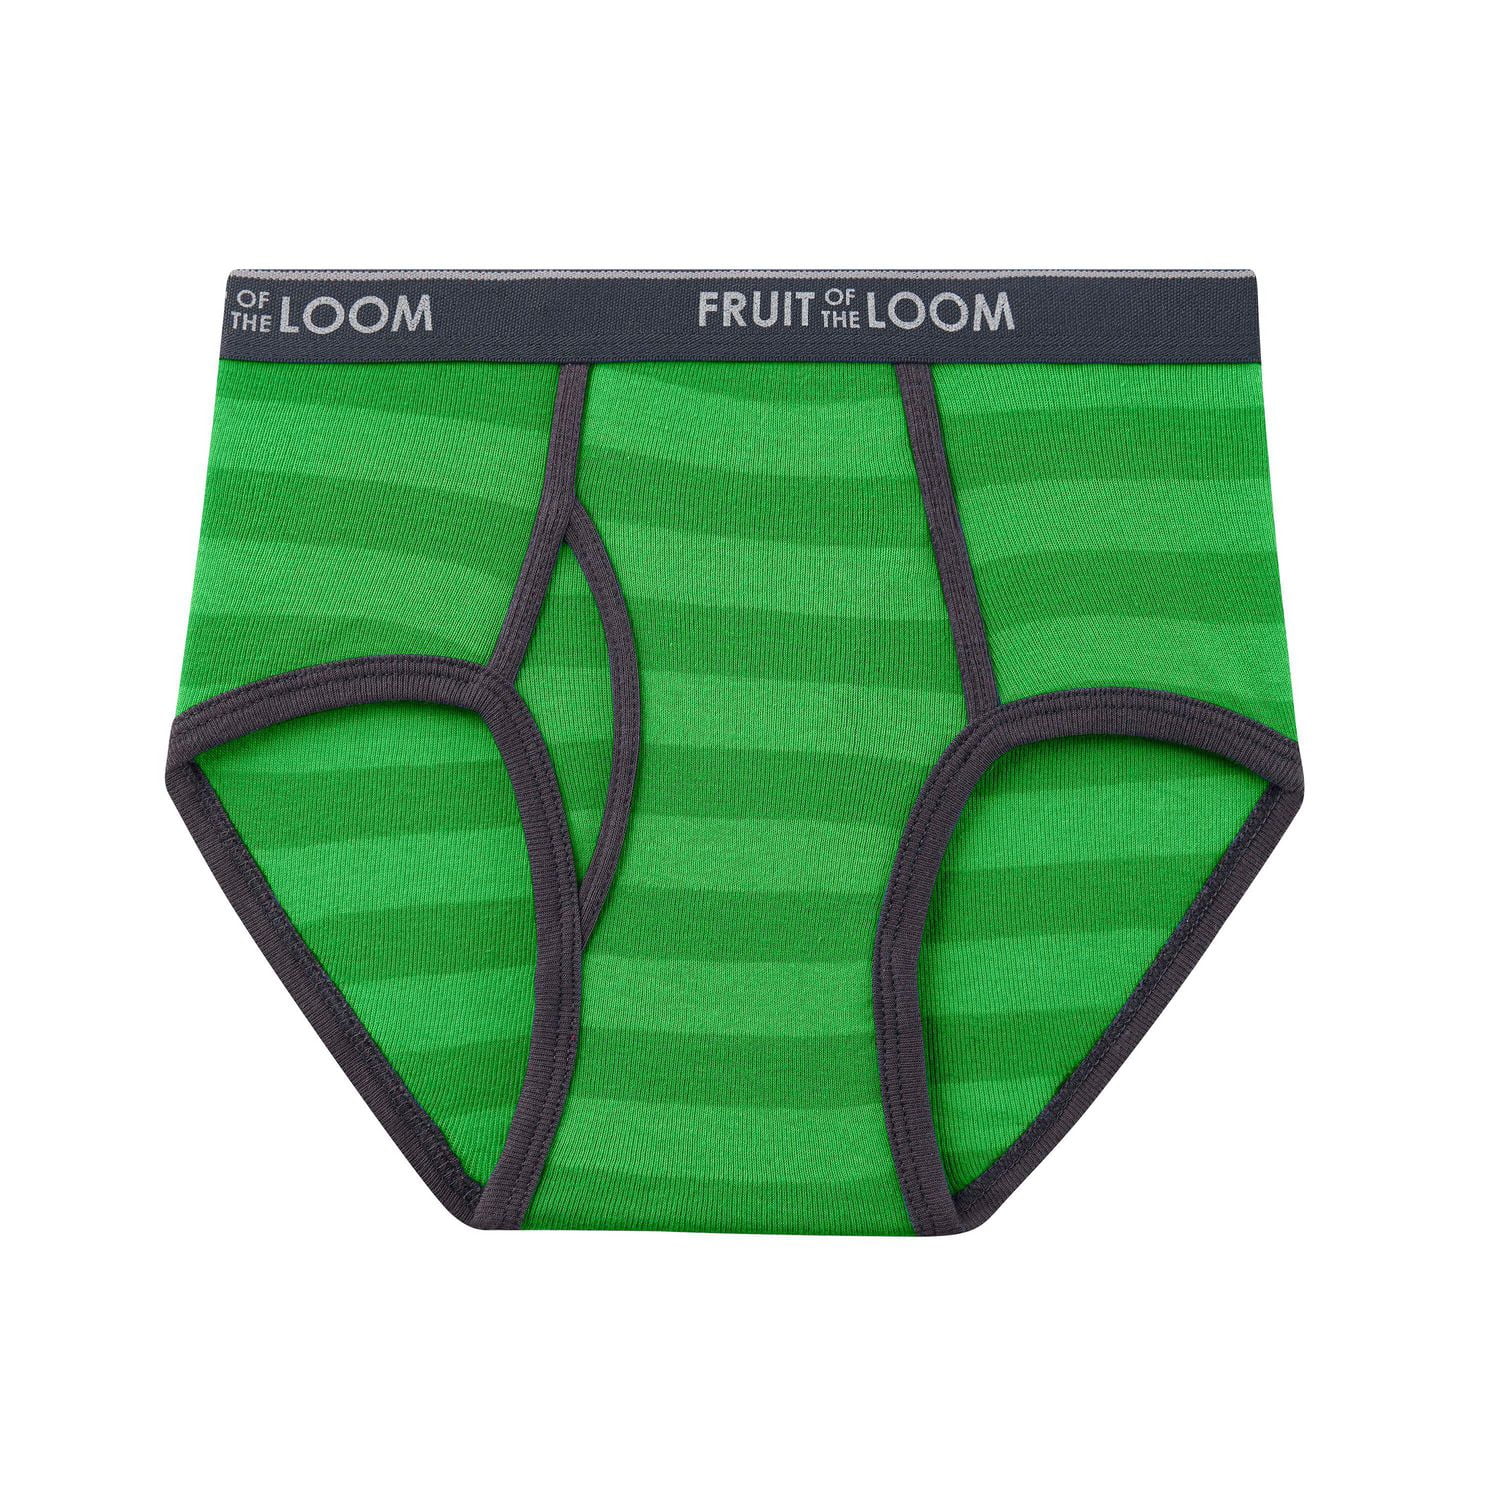 Fruit of the Loom Boys Underwear, 10 Pack Assorted India